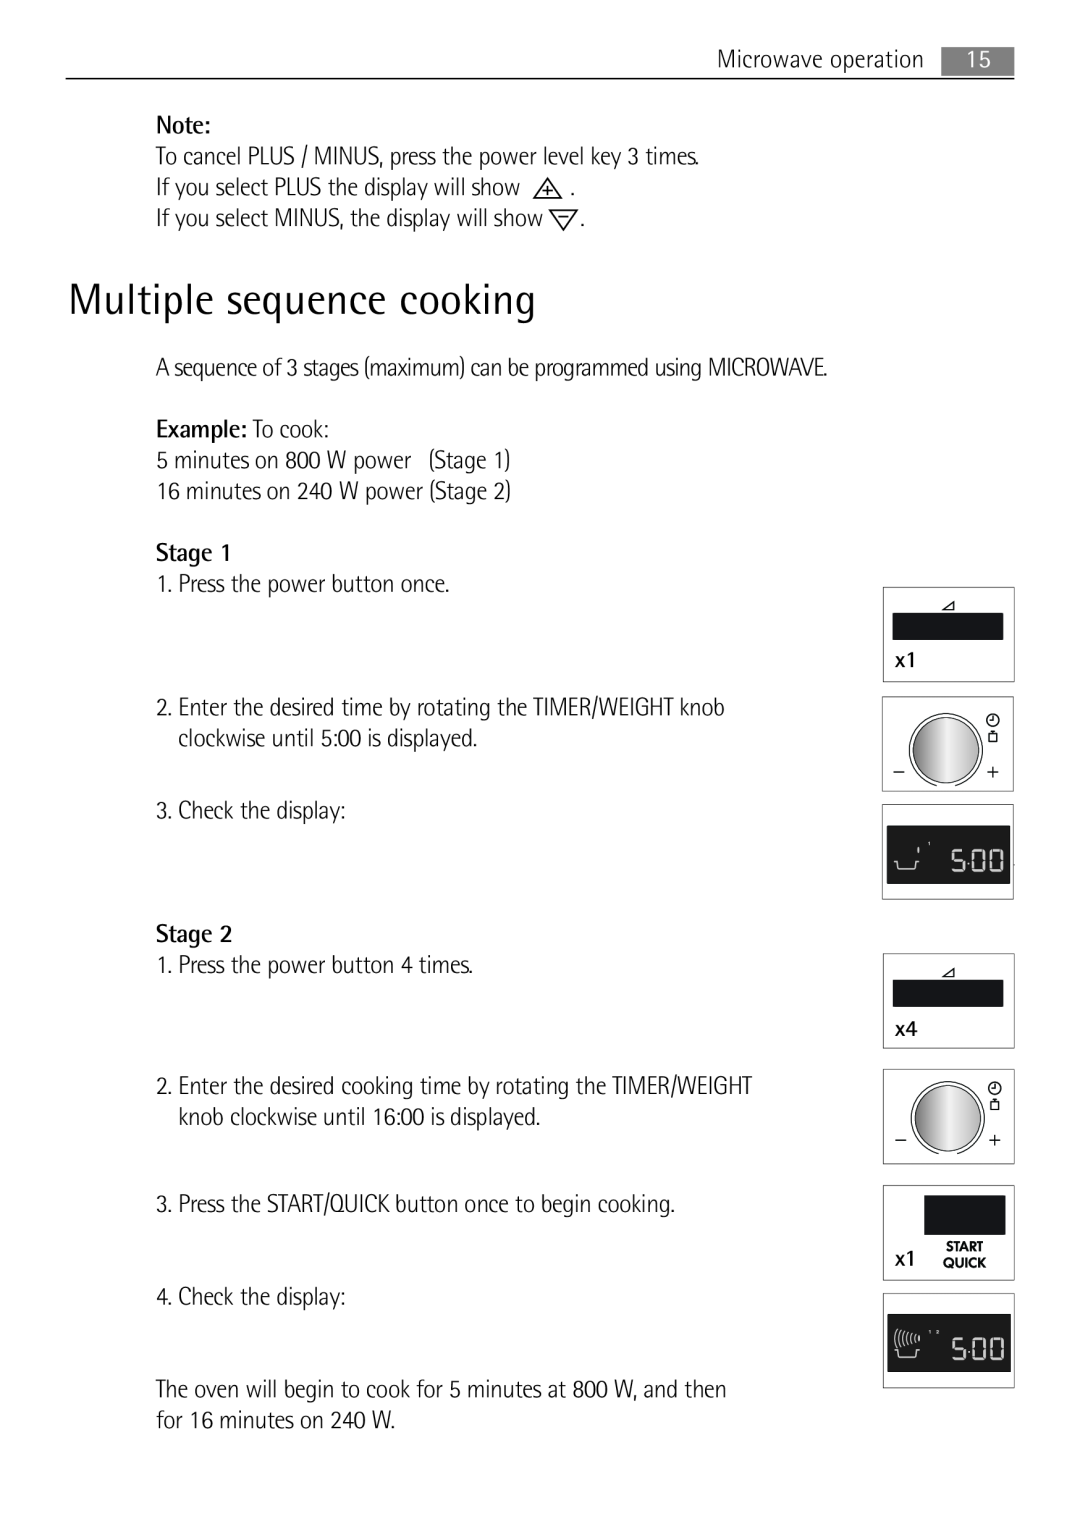 AEG MC1753E, MC1763E user manual Multiple sequence cooking, Example To cook, Stage 